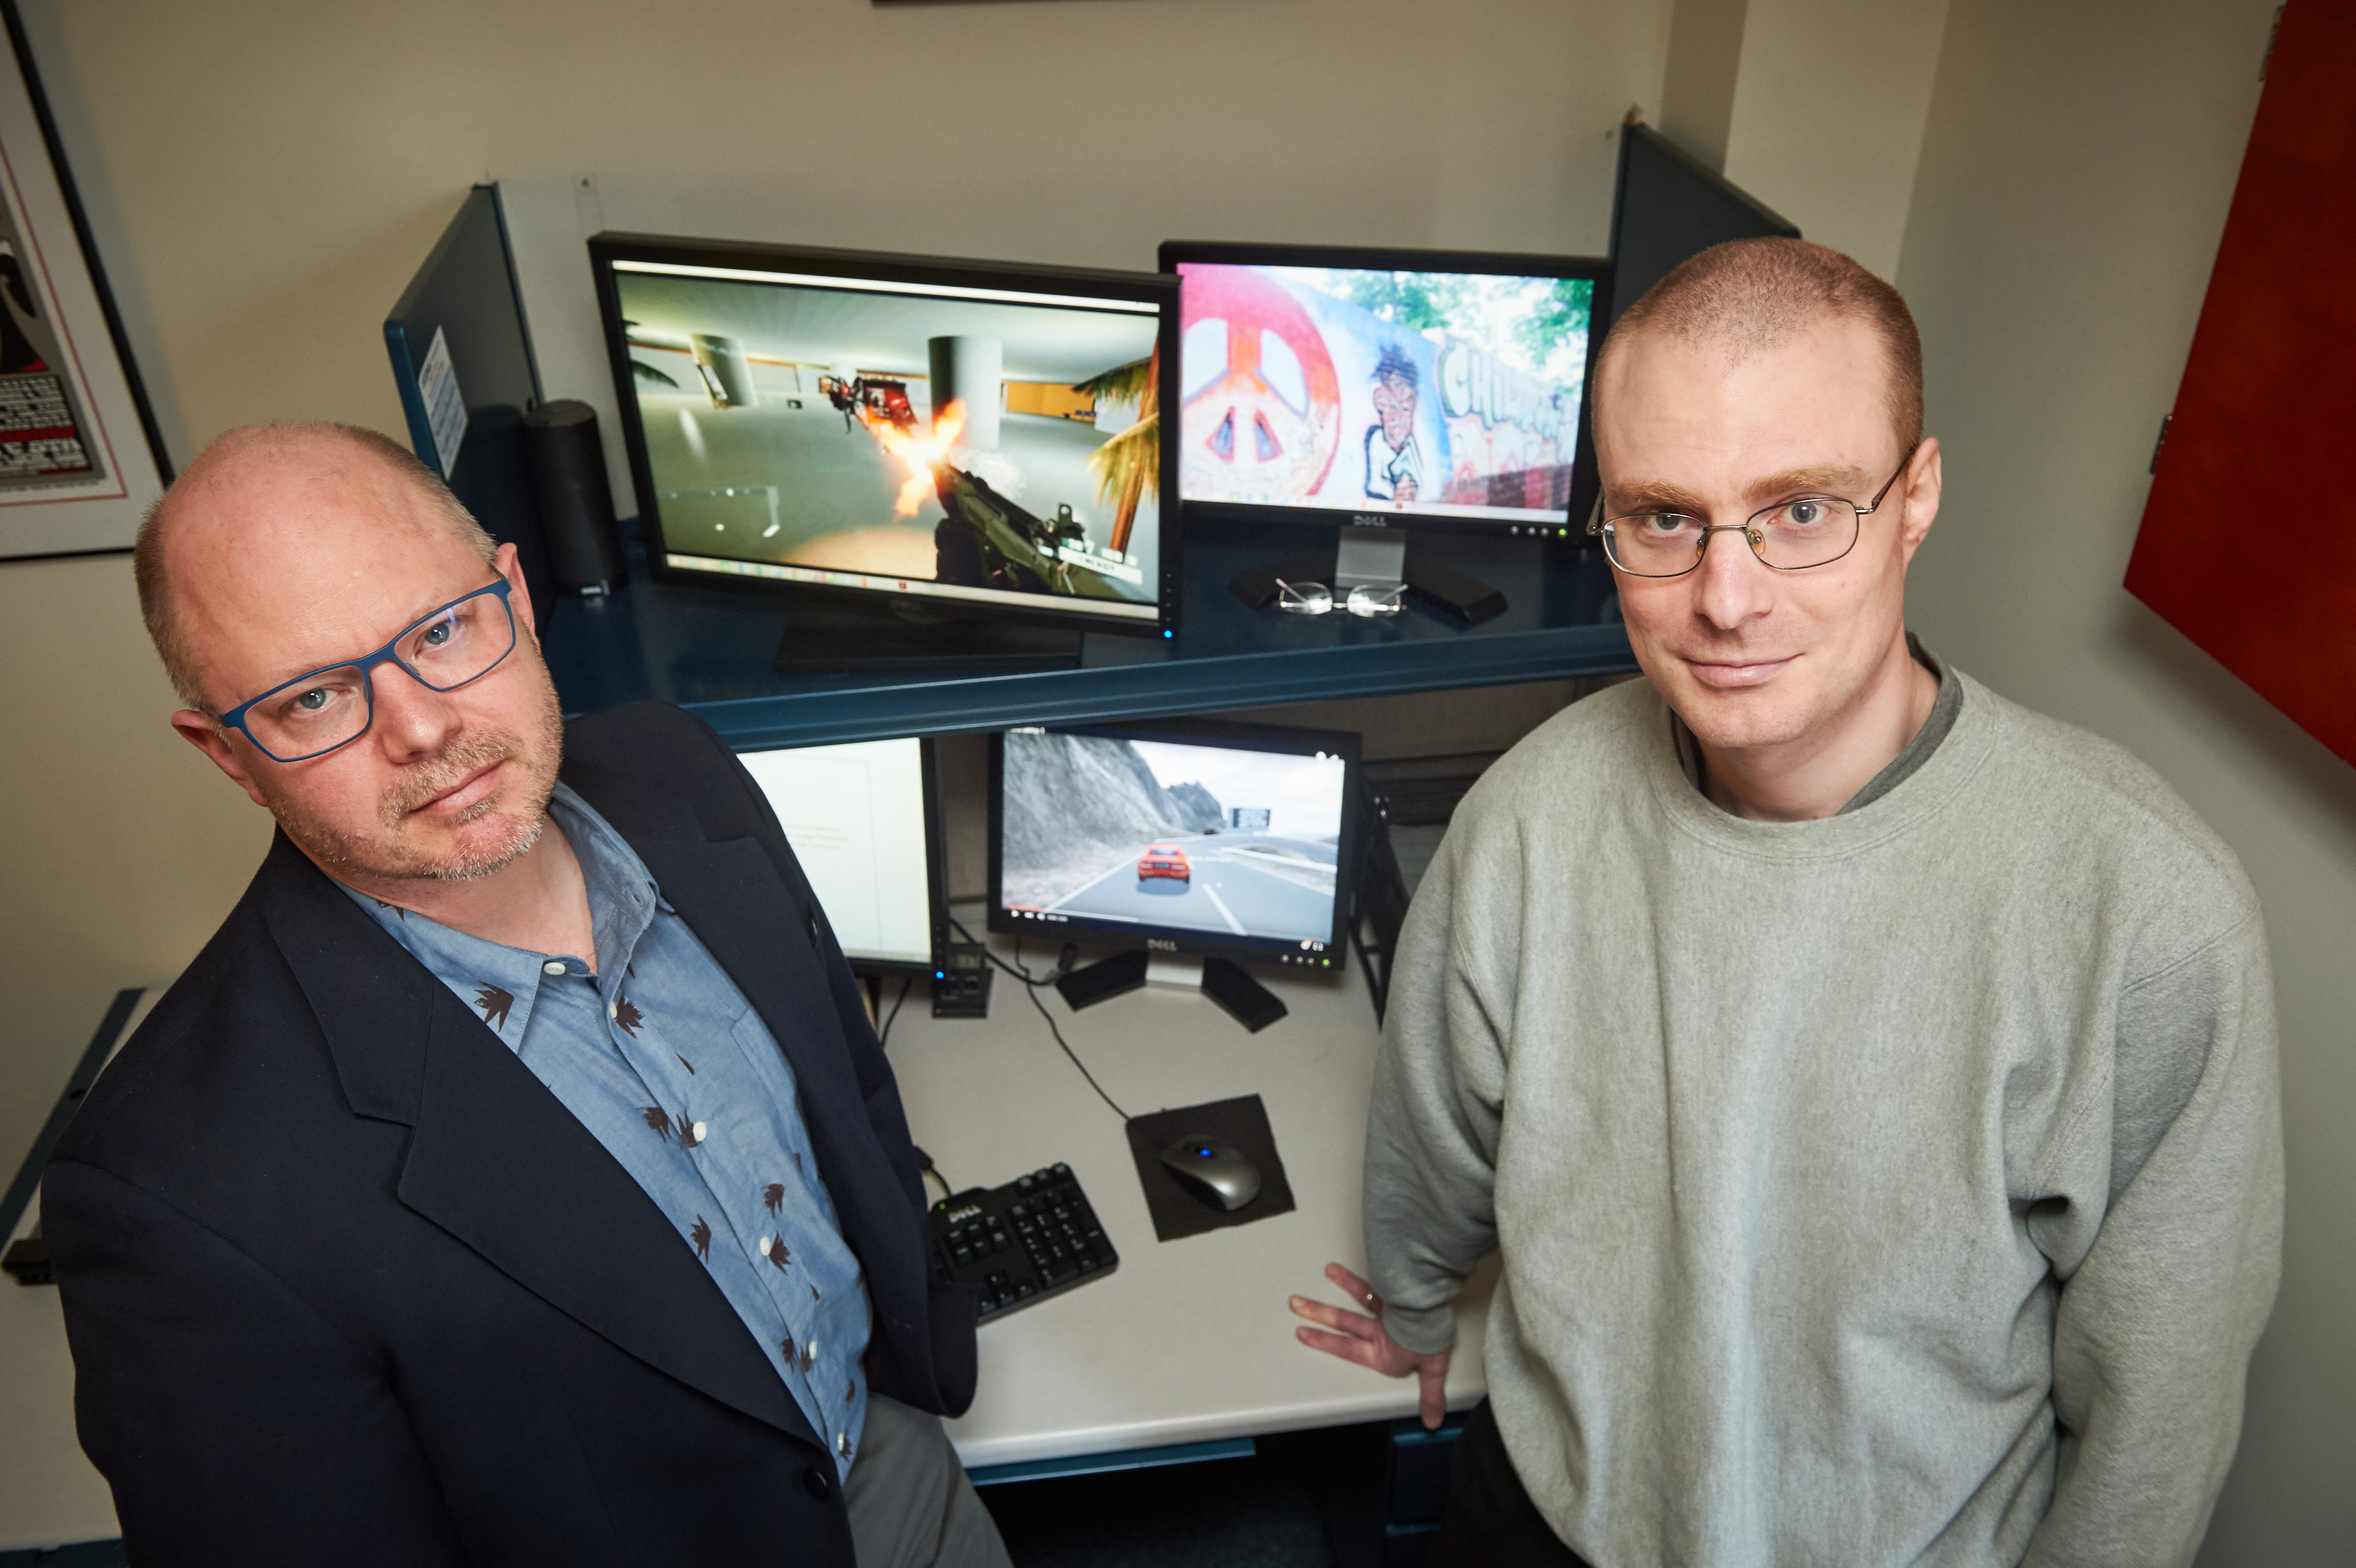 Hart Blanton, left, professor of psychology, and postdoc Chris Burrows '15 Ph.D. study video games with embedded health messages on March 9, 2016. (Peter Morenus/UConn Photo)